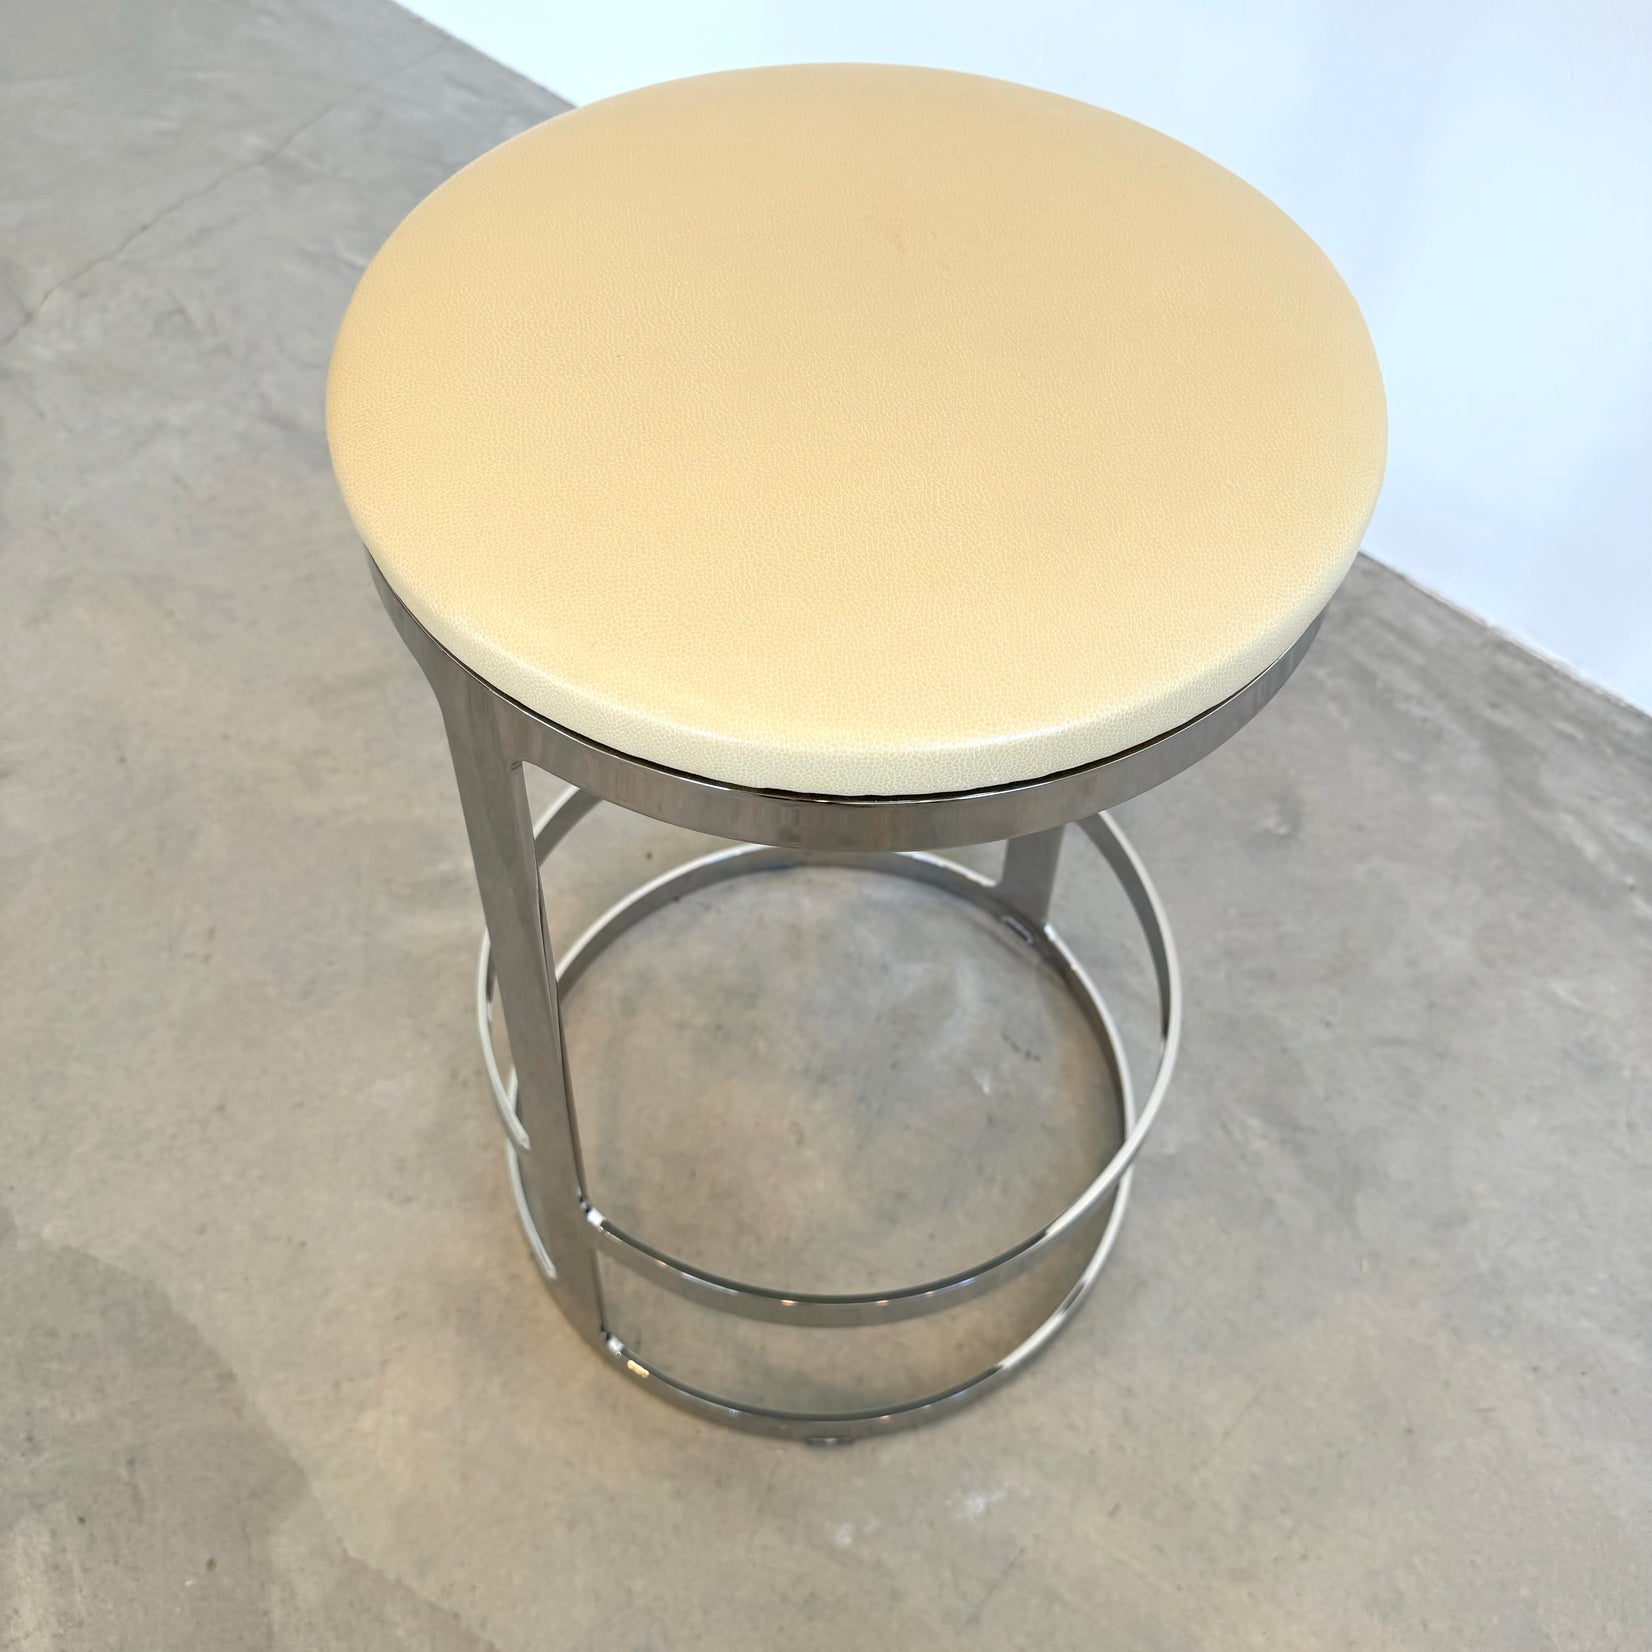 Set of Three Polished Steel and Leather Swivel Counter Stools, 2000s USA